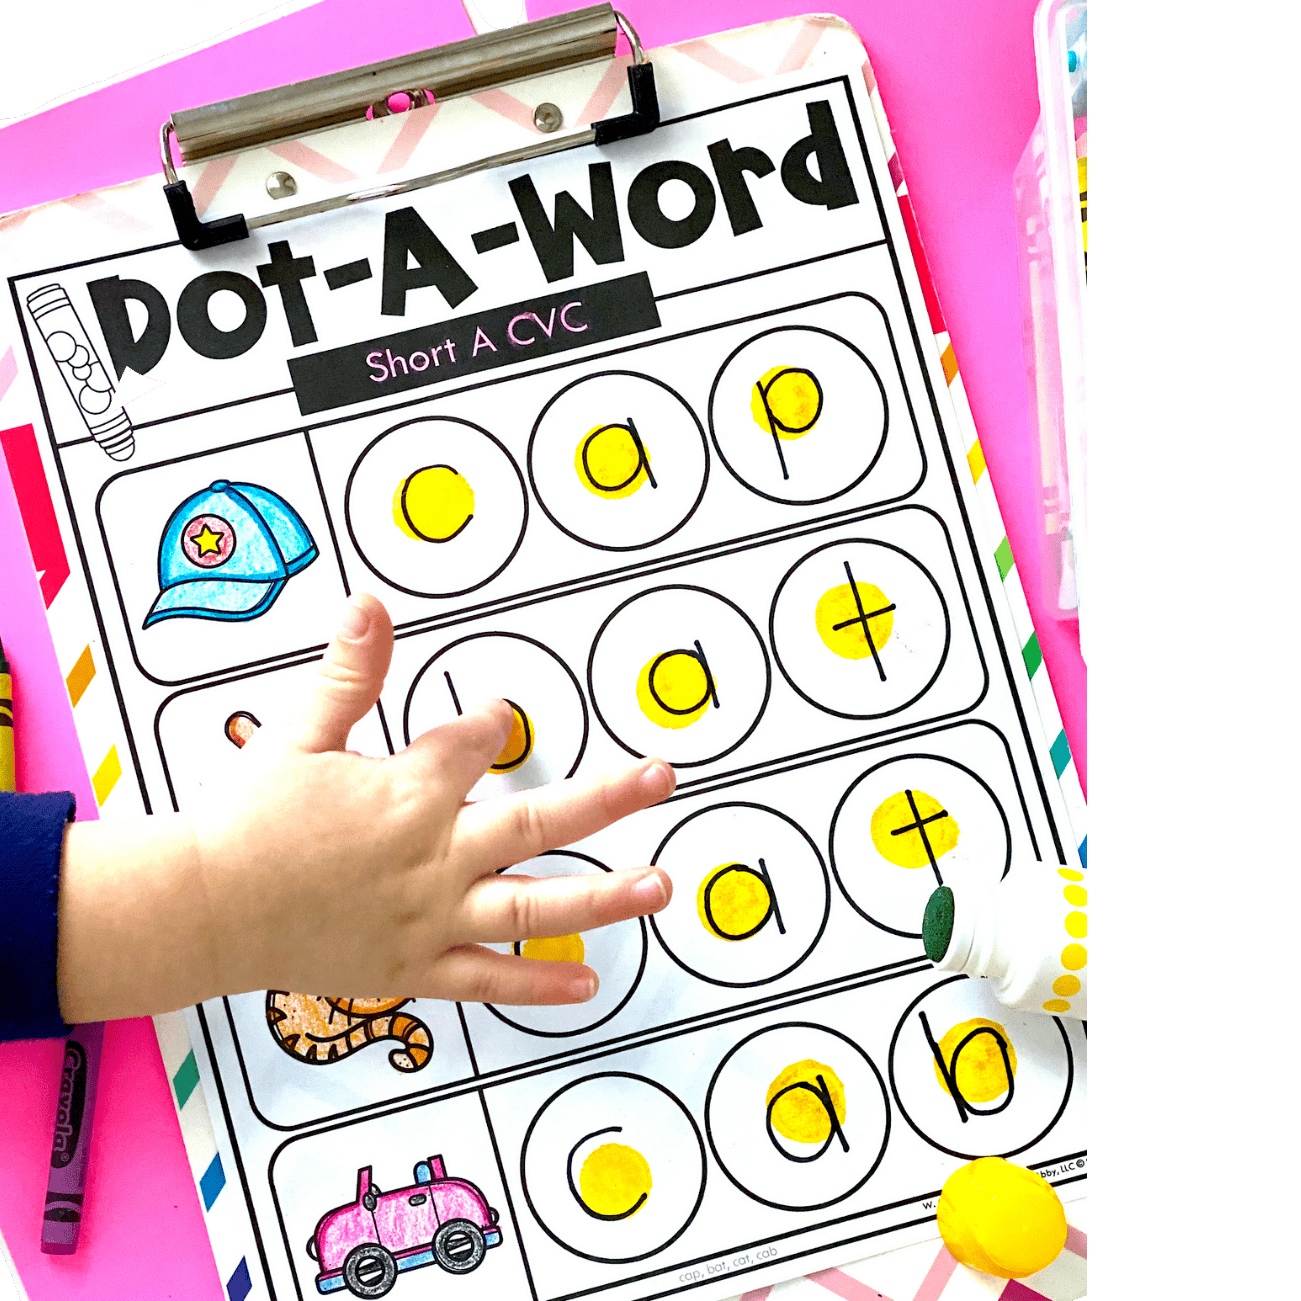 Simple strategies to teach students to spell words in kindergarten and first grade. Download a free 25-page activity printable, too! babblingabby.net